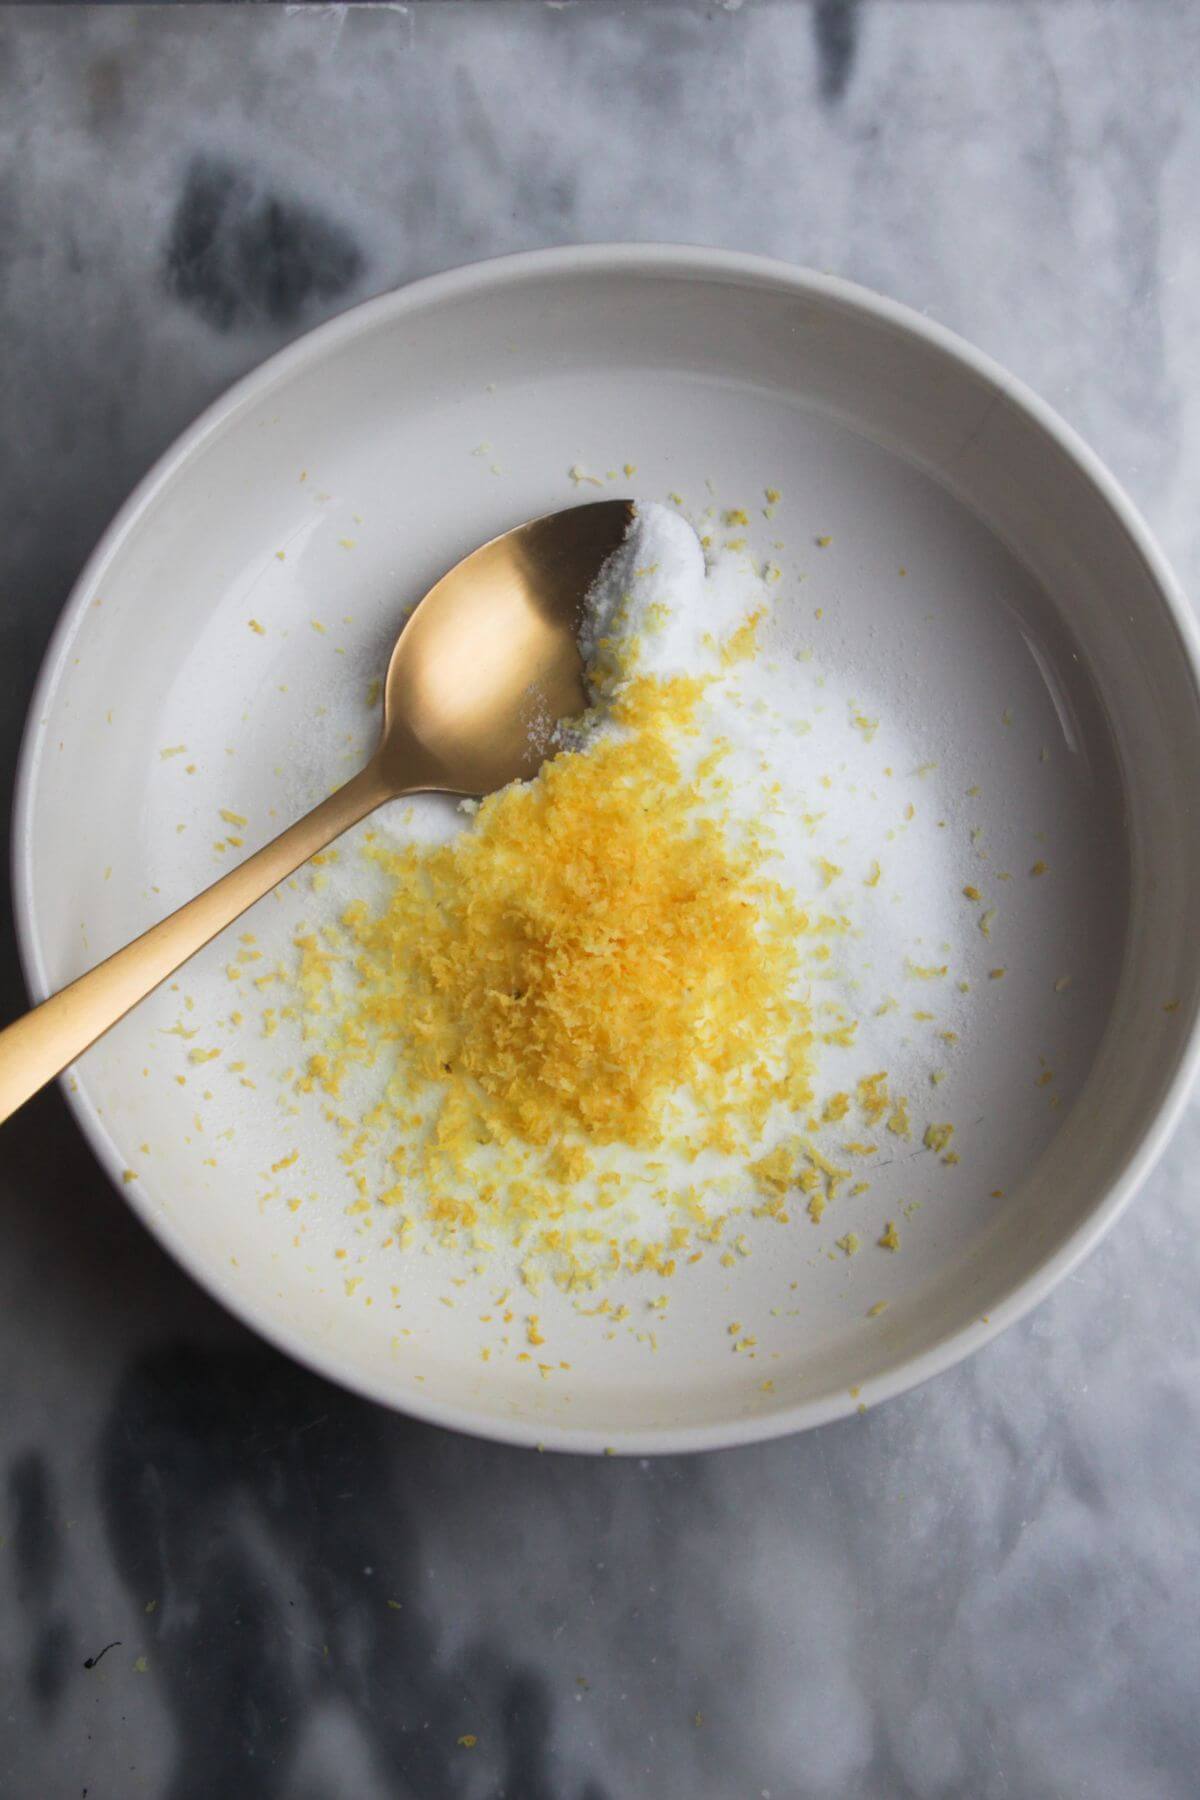 Salt and lemon zest in a small white bowl on a grey marble background.